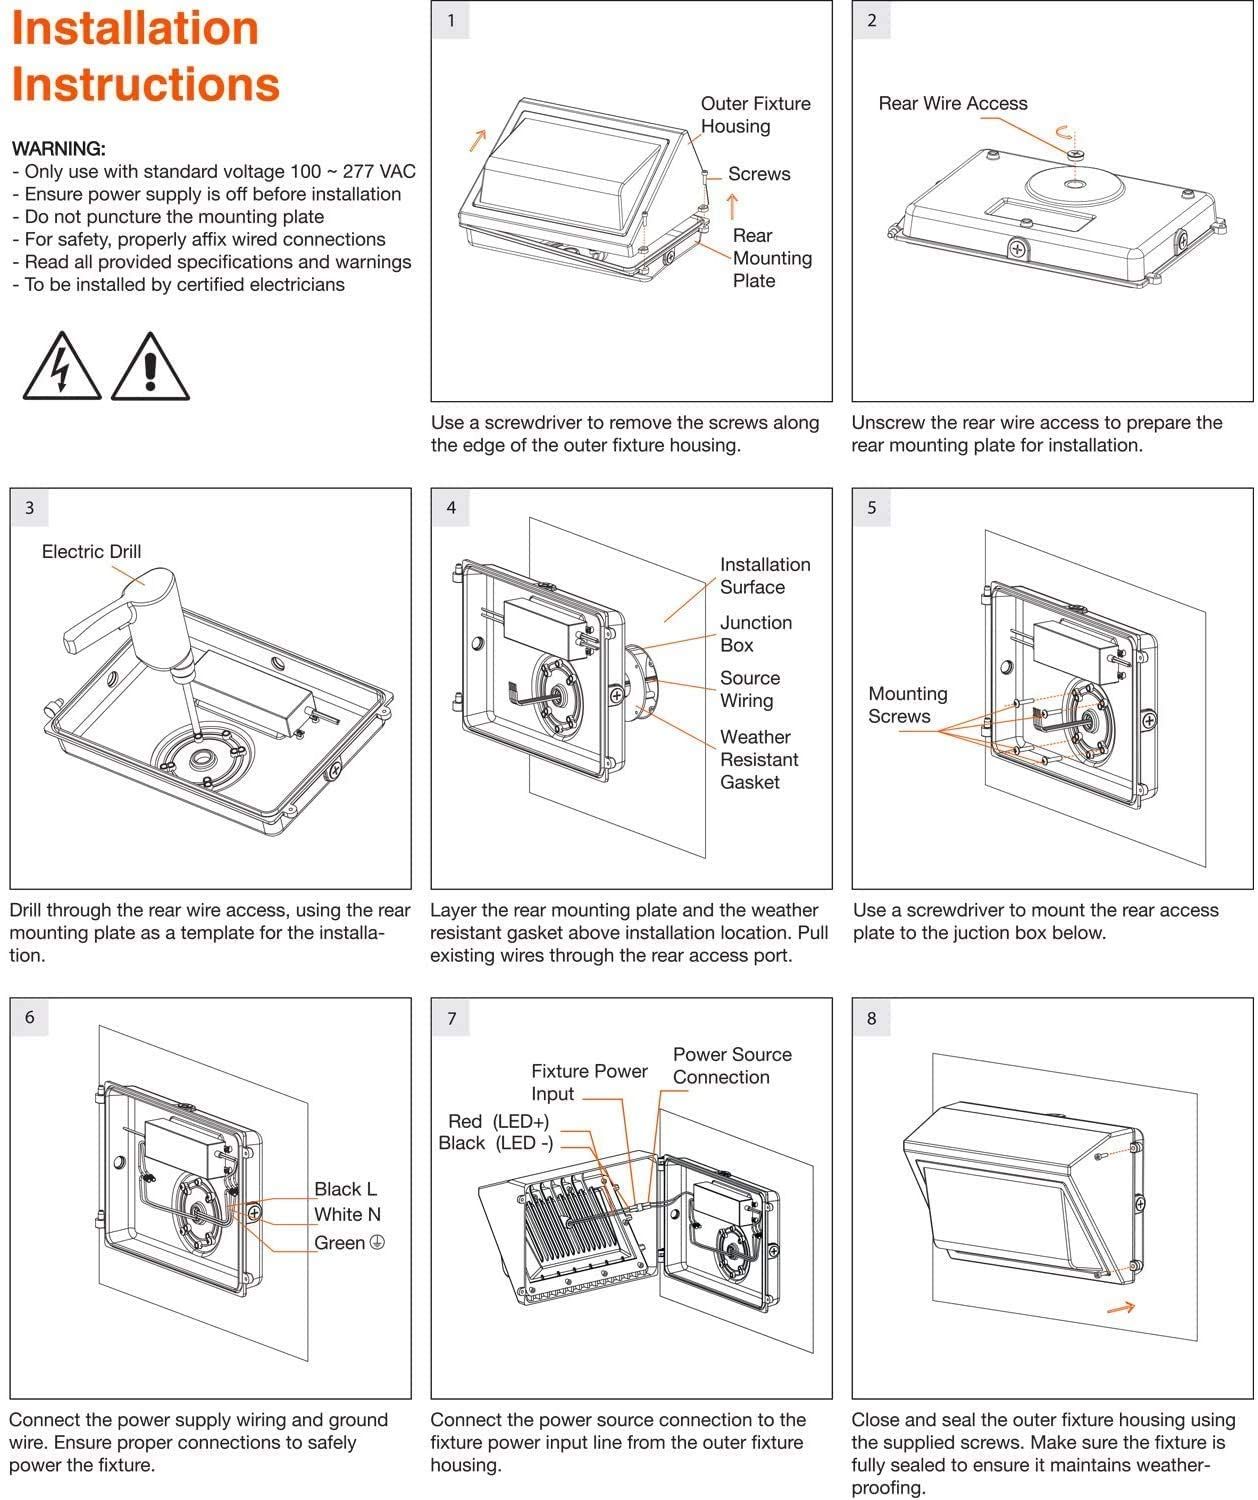 Installation instructions for LED wall packs.